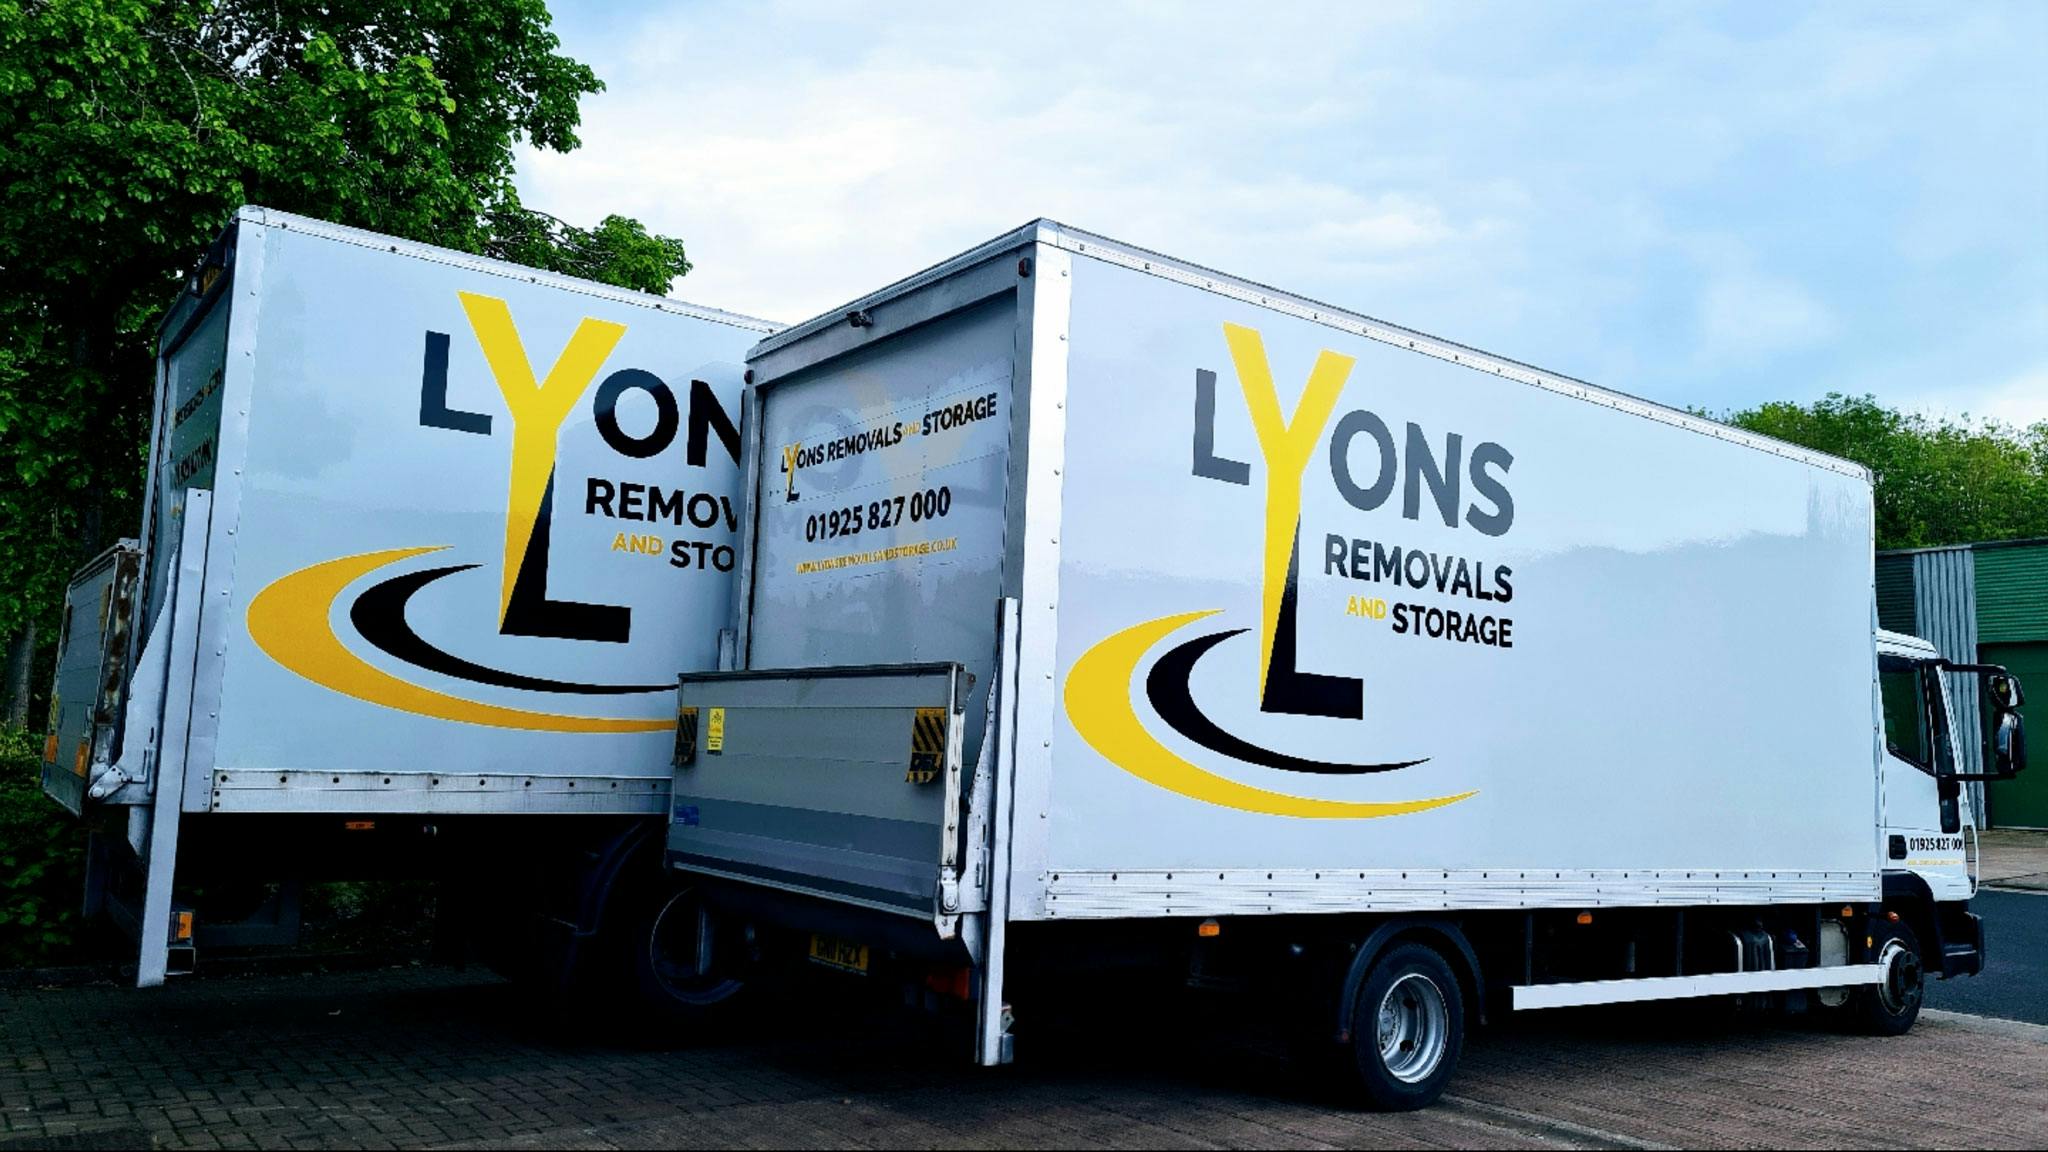 Removals and storage Manchester